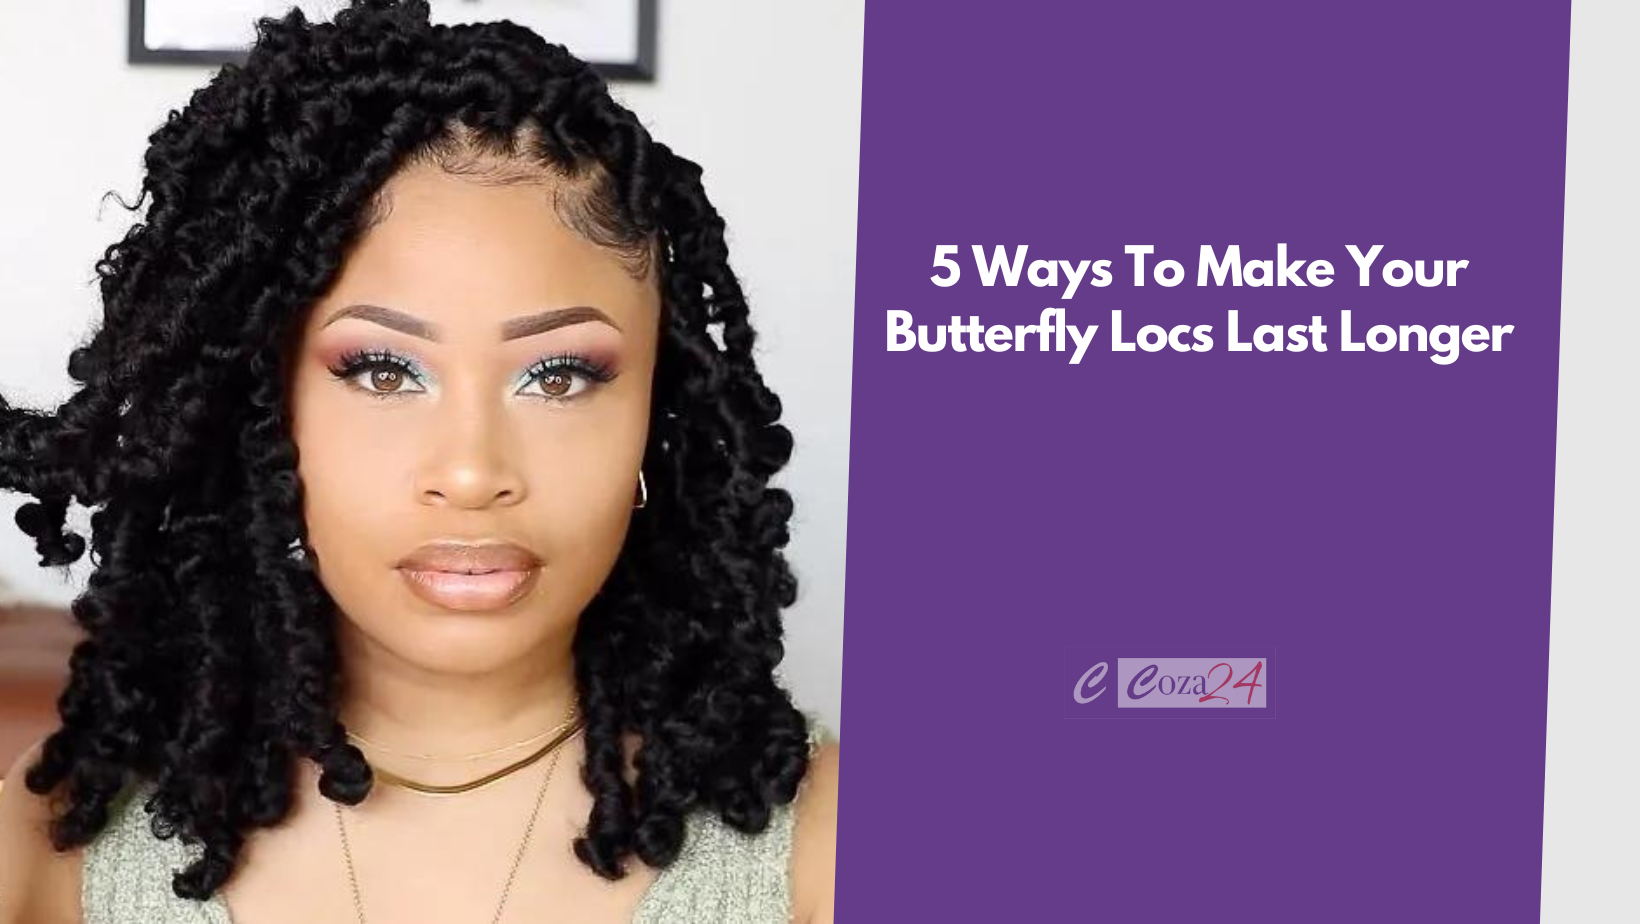 5 Ways To Make Your Butterfly Locs Last Longer